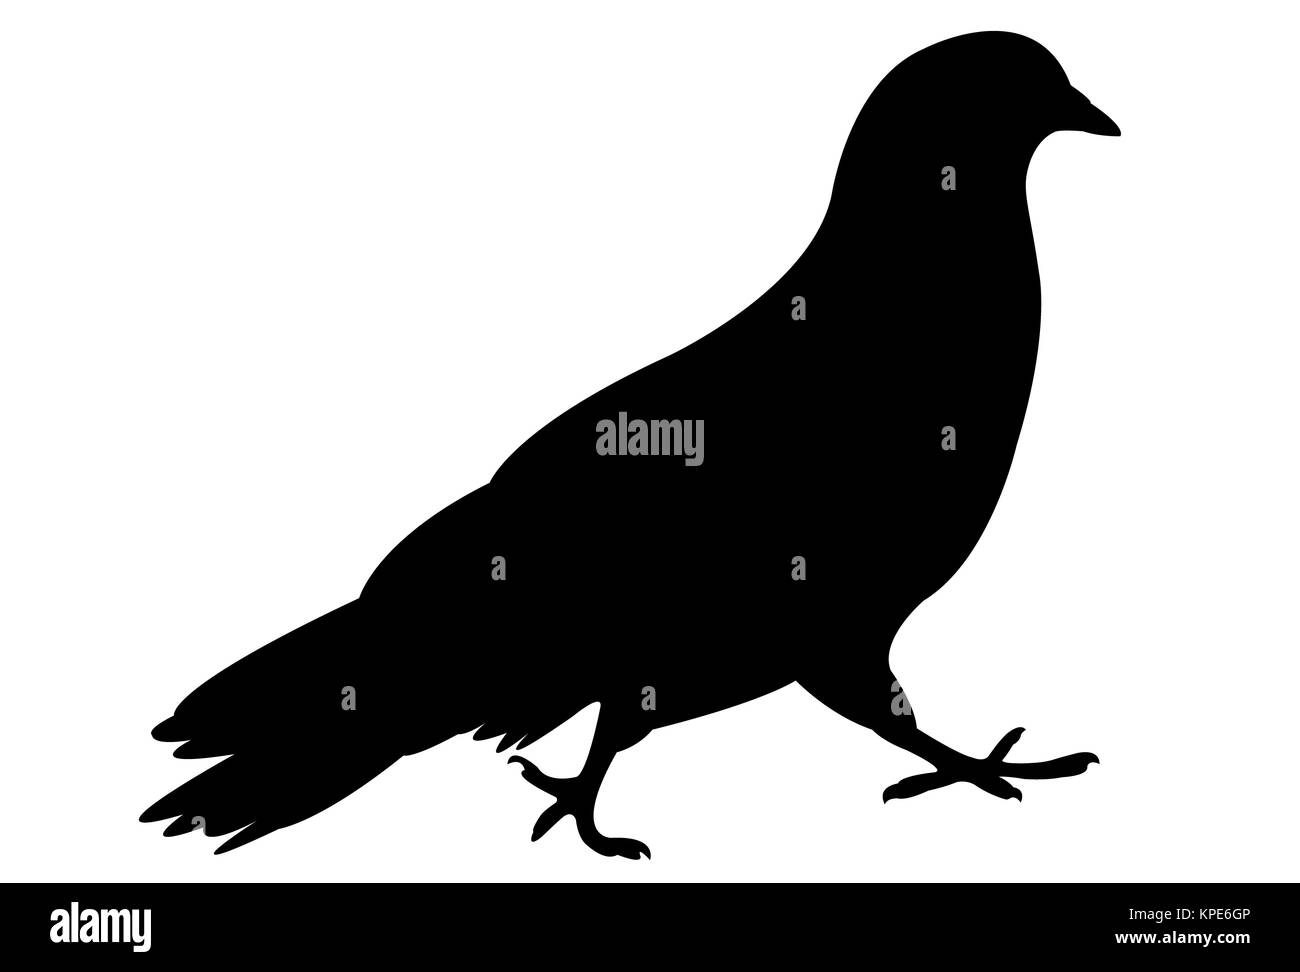 a pigeon silhouette Stock Photo